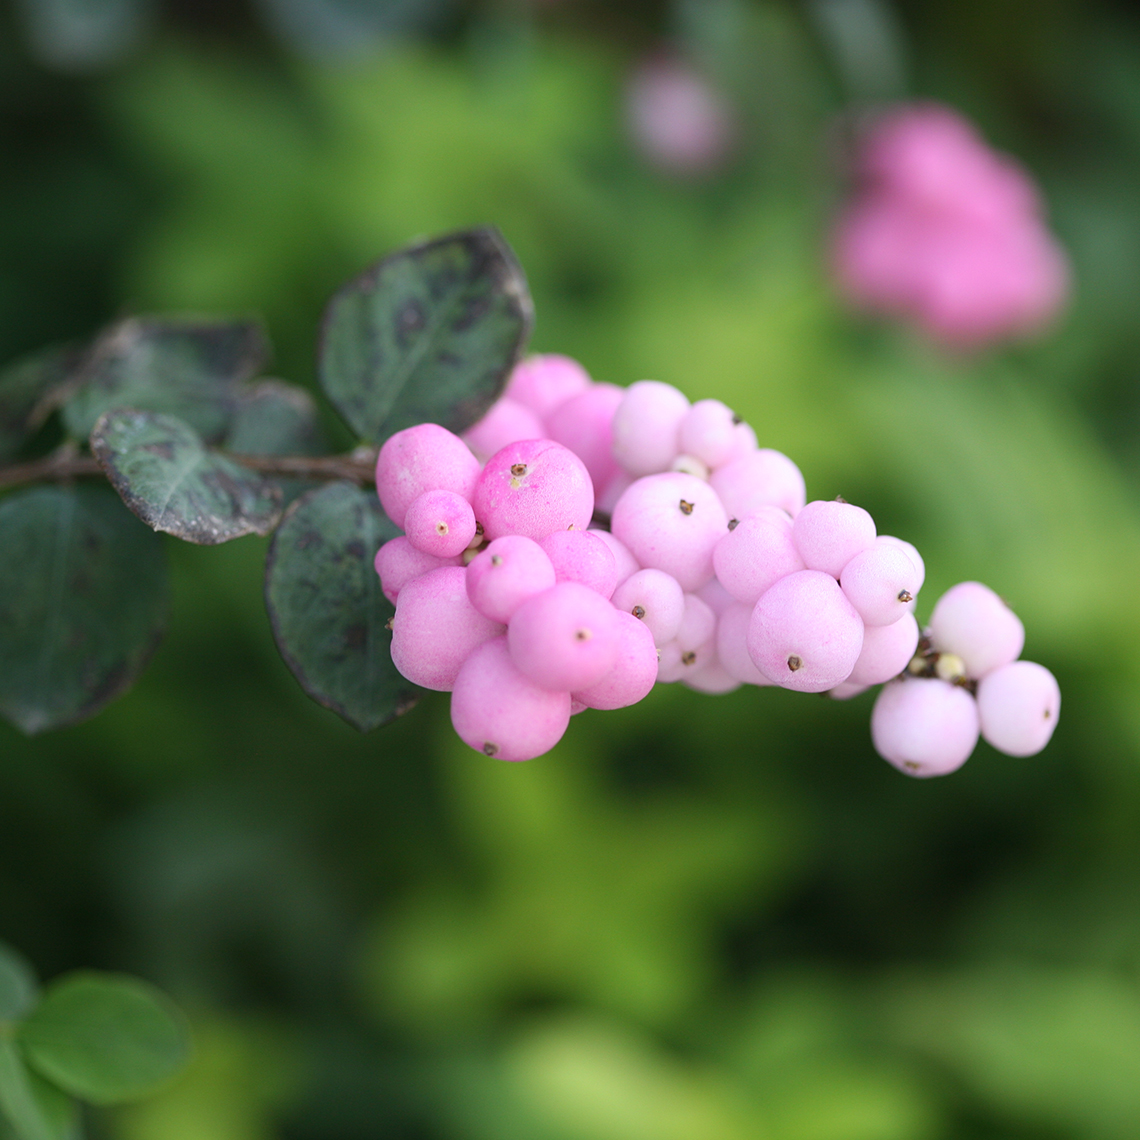 Close up of a clusters of pink berries on Proud Berry symphoricarpos aka coralberry